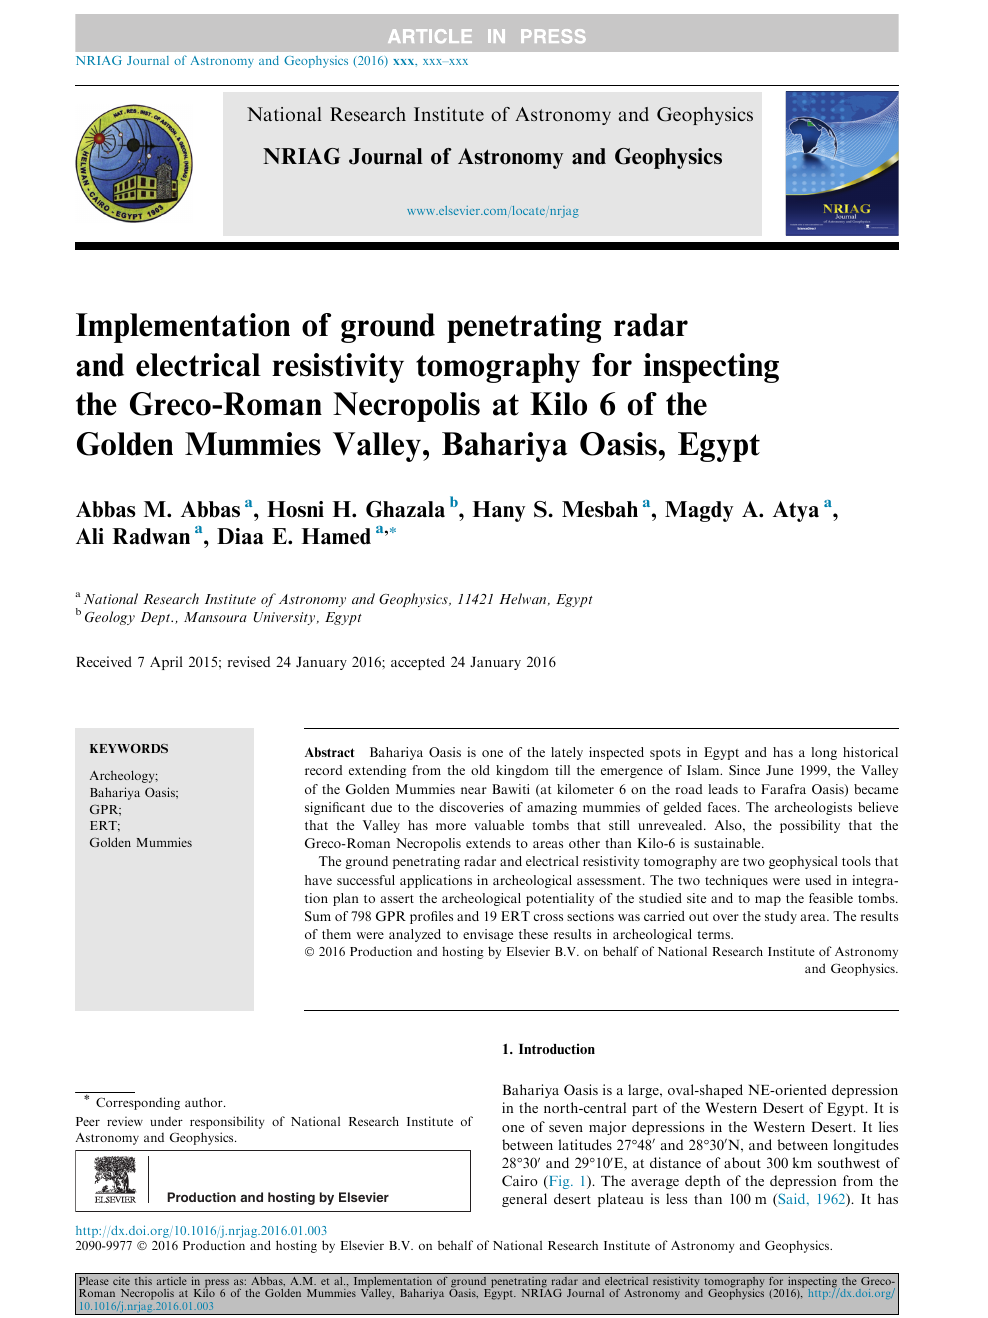 Implementation Of Ground Penetrating Radar And Electrical Resistivity Tomography For Inspecting The Greco Roman Necropolis At Kilo 6 Of The Golden Mummies Valley Bahariya Oasis Egypt Topic Of Research Paper In Earth